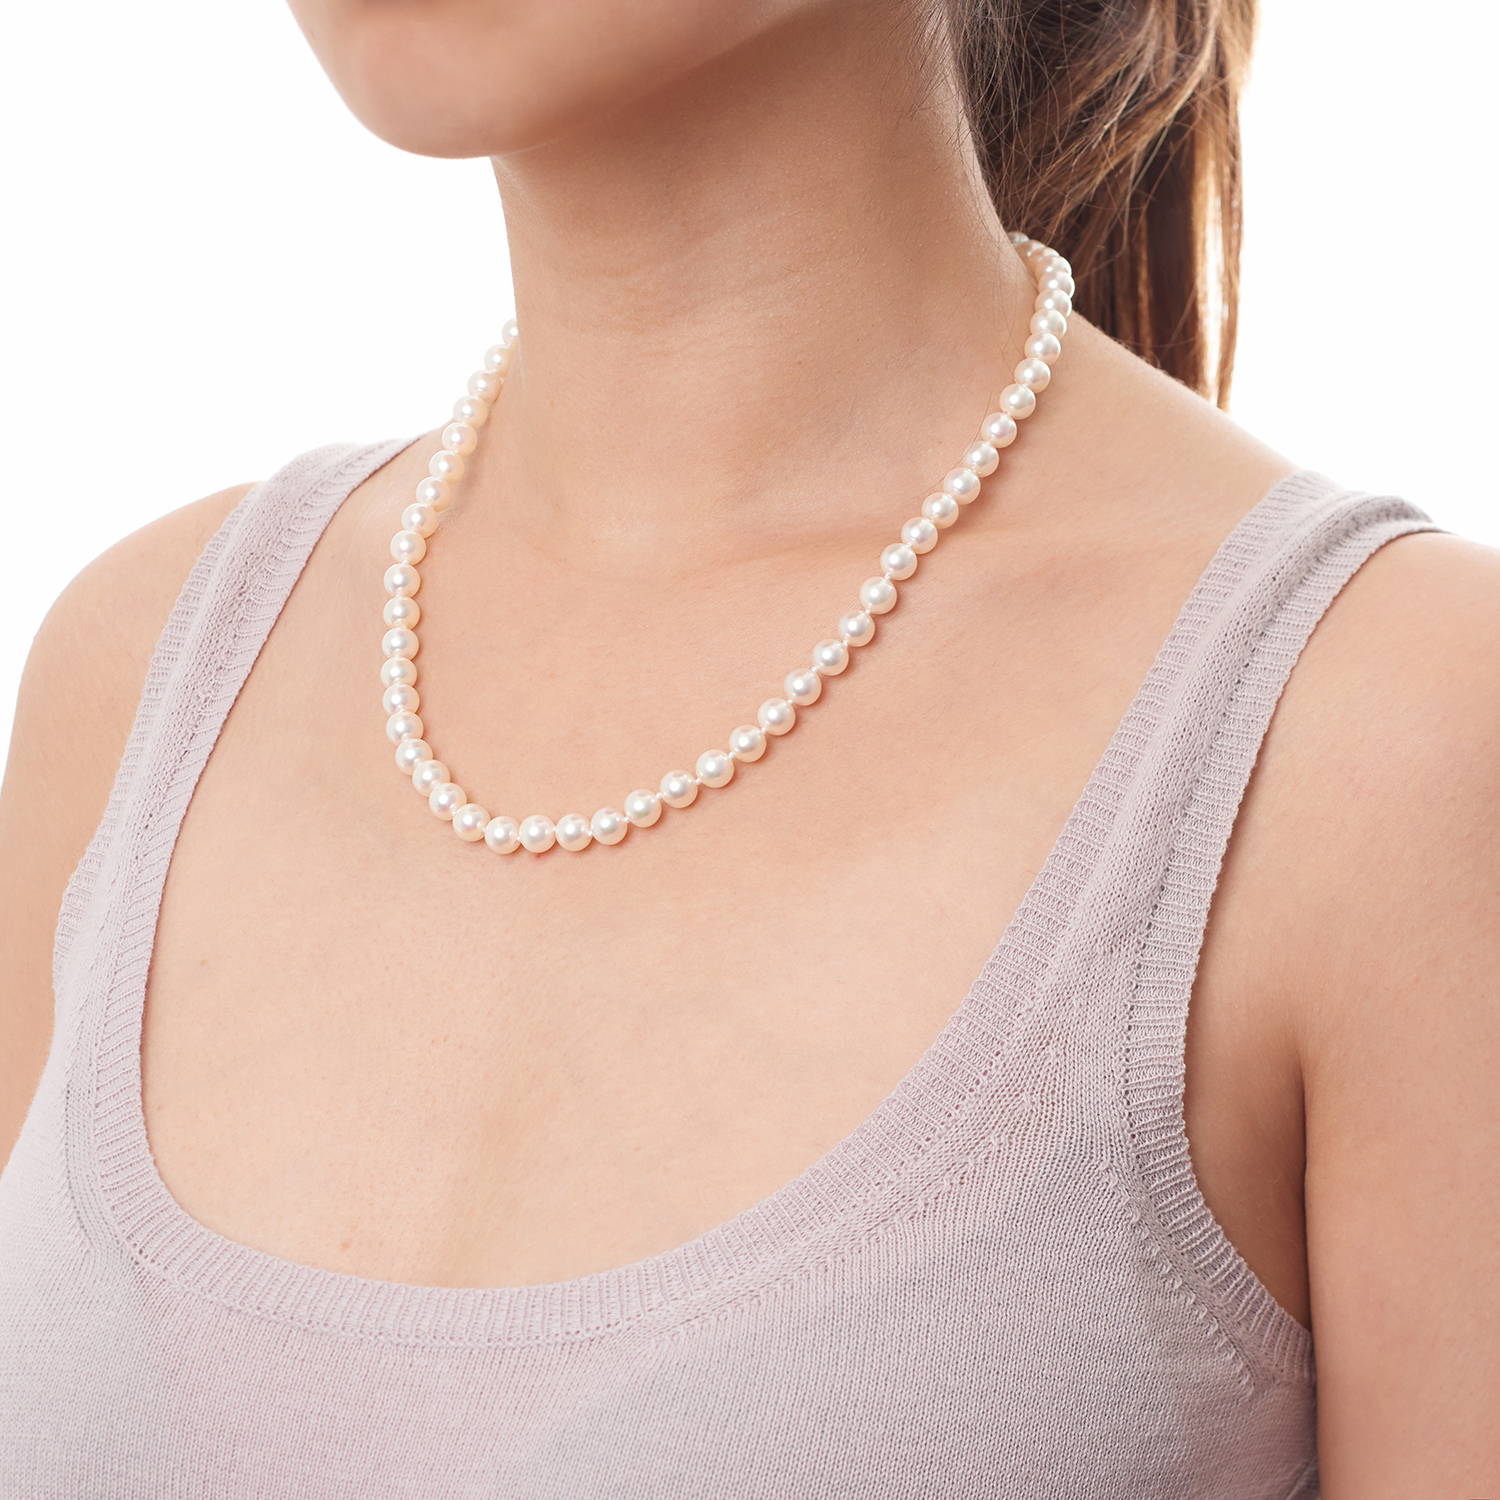 Pearl Necklace Sizes: 6.5-7.0mm